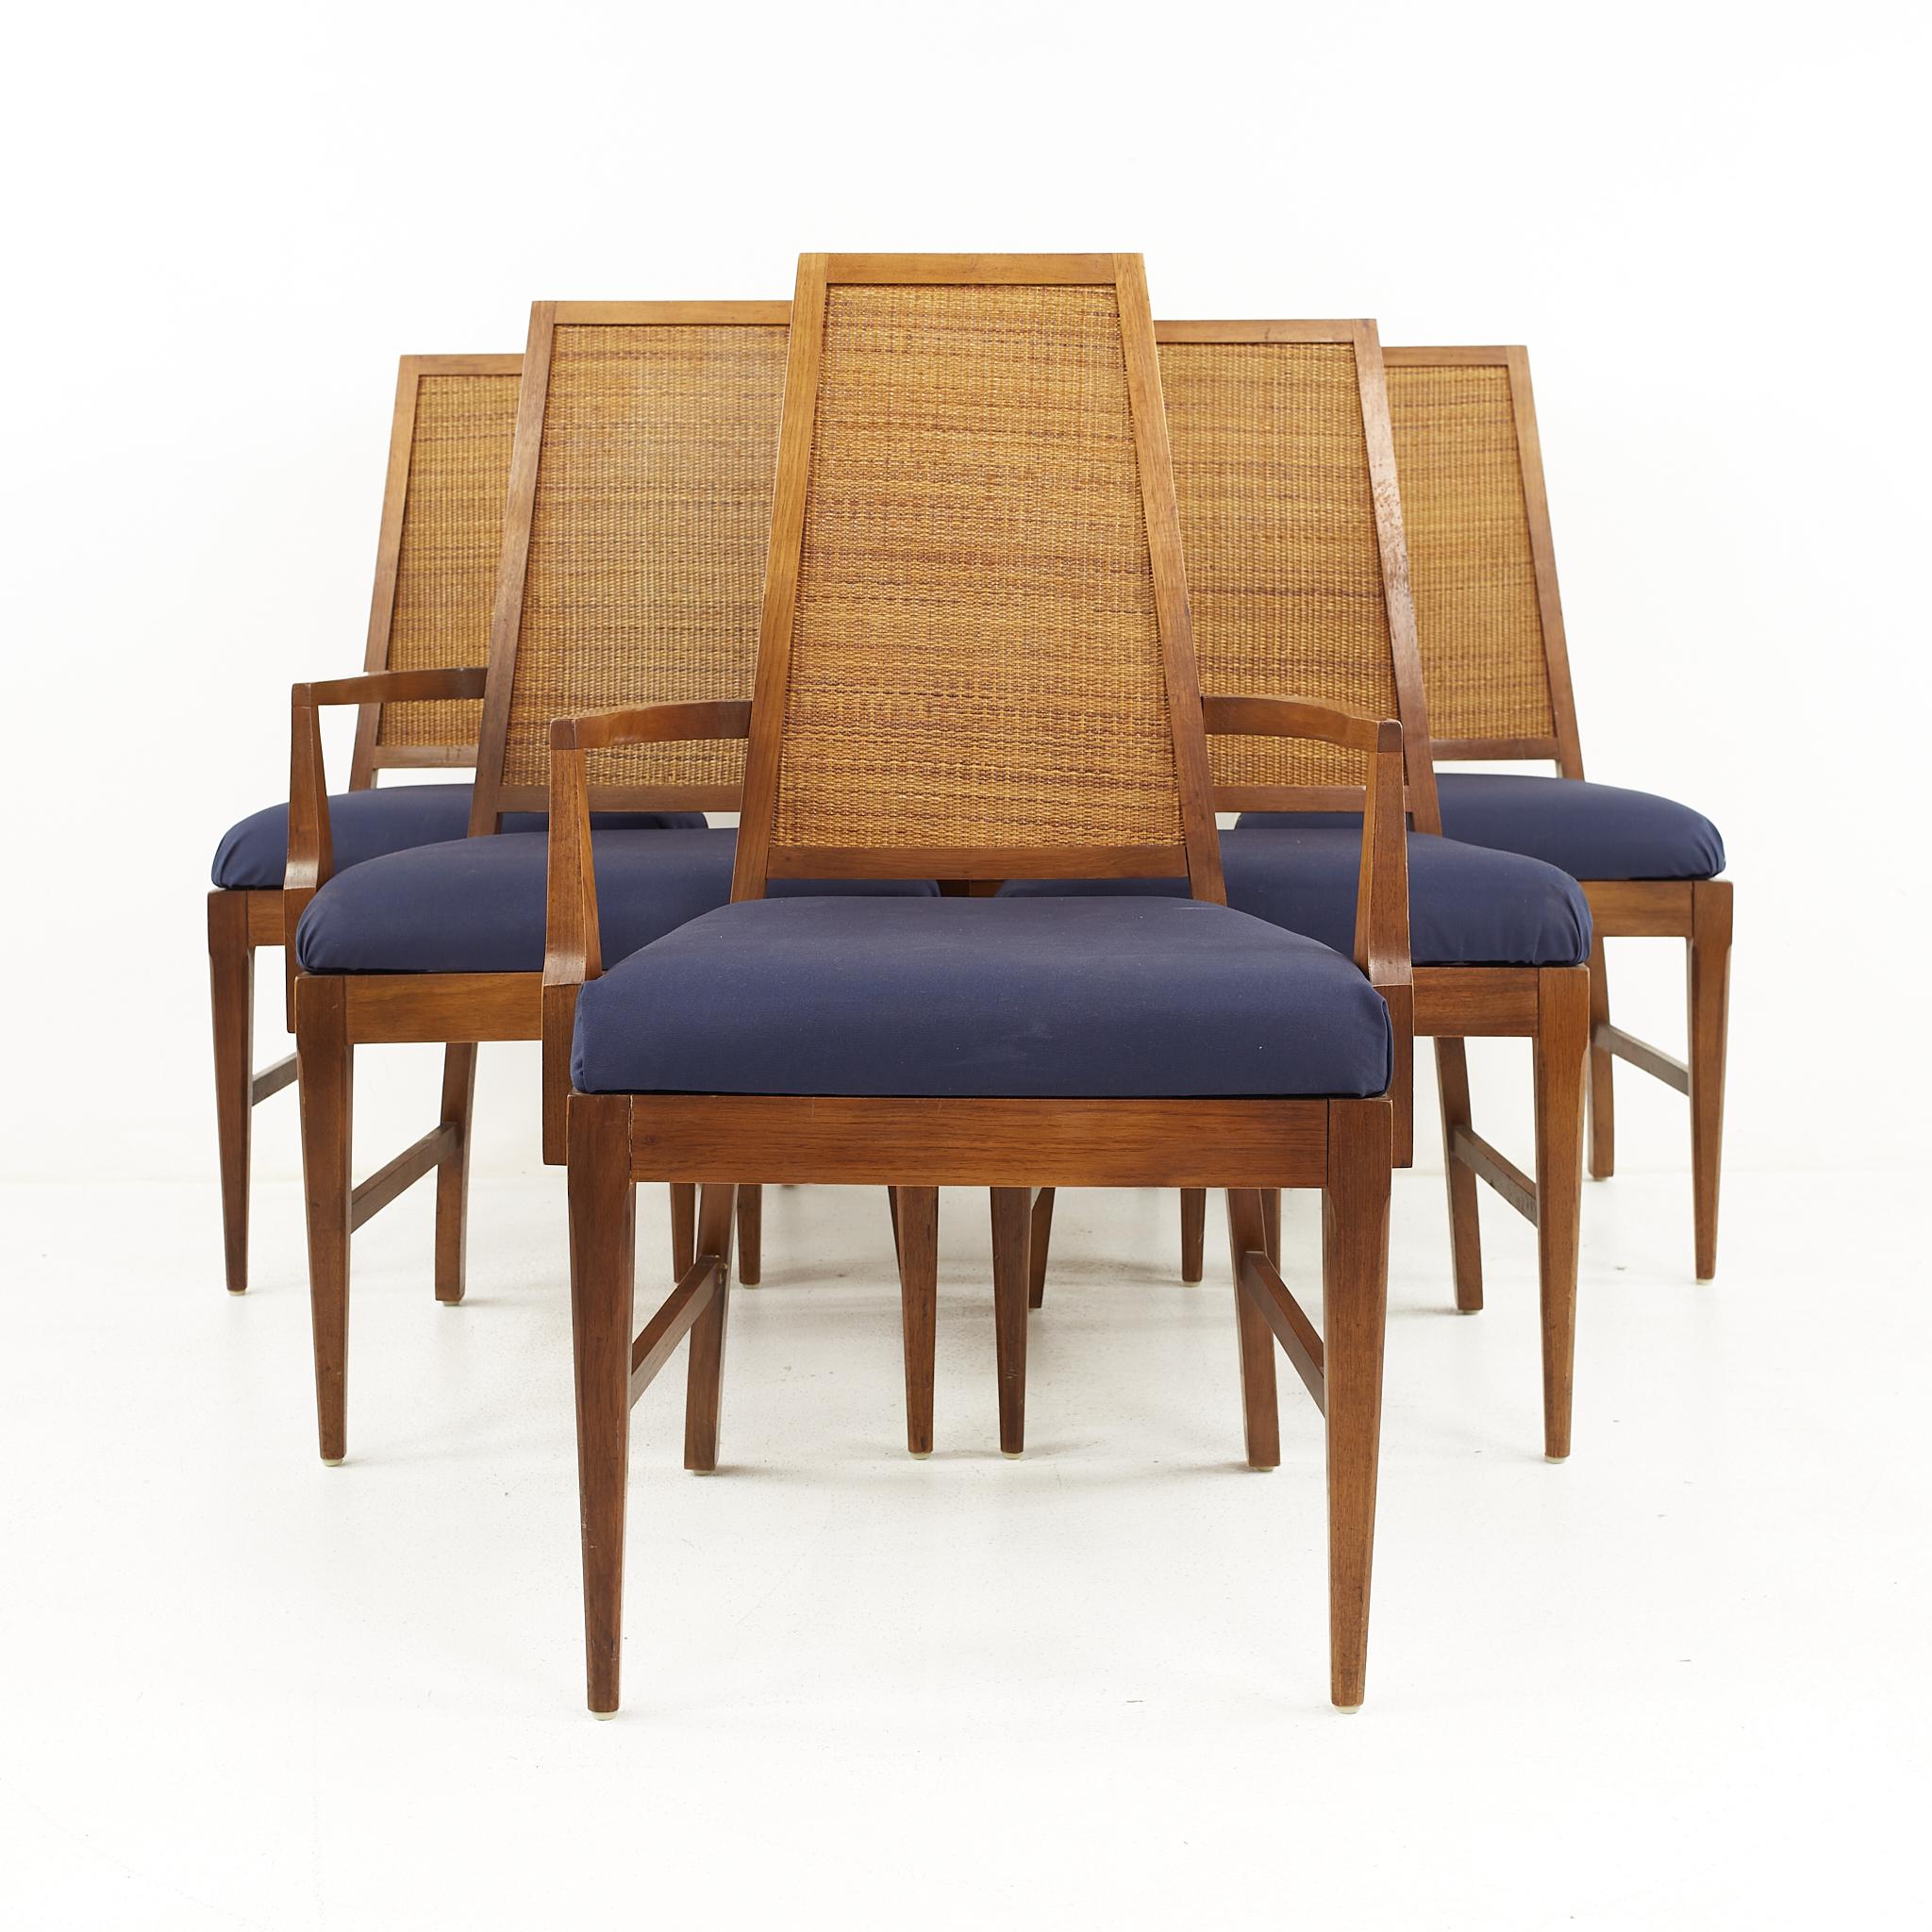 Young Manufacturing mid century walnut cane back dining chairs - Set of 6

The captains' chairs measure: 22.75 wide x 22 deep x 39.5 high, with a seat height of 19 inches and arm height of 25.5 inches 
The side chairs measure: 19.5 wide x 20 deep